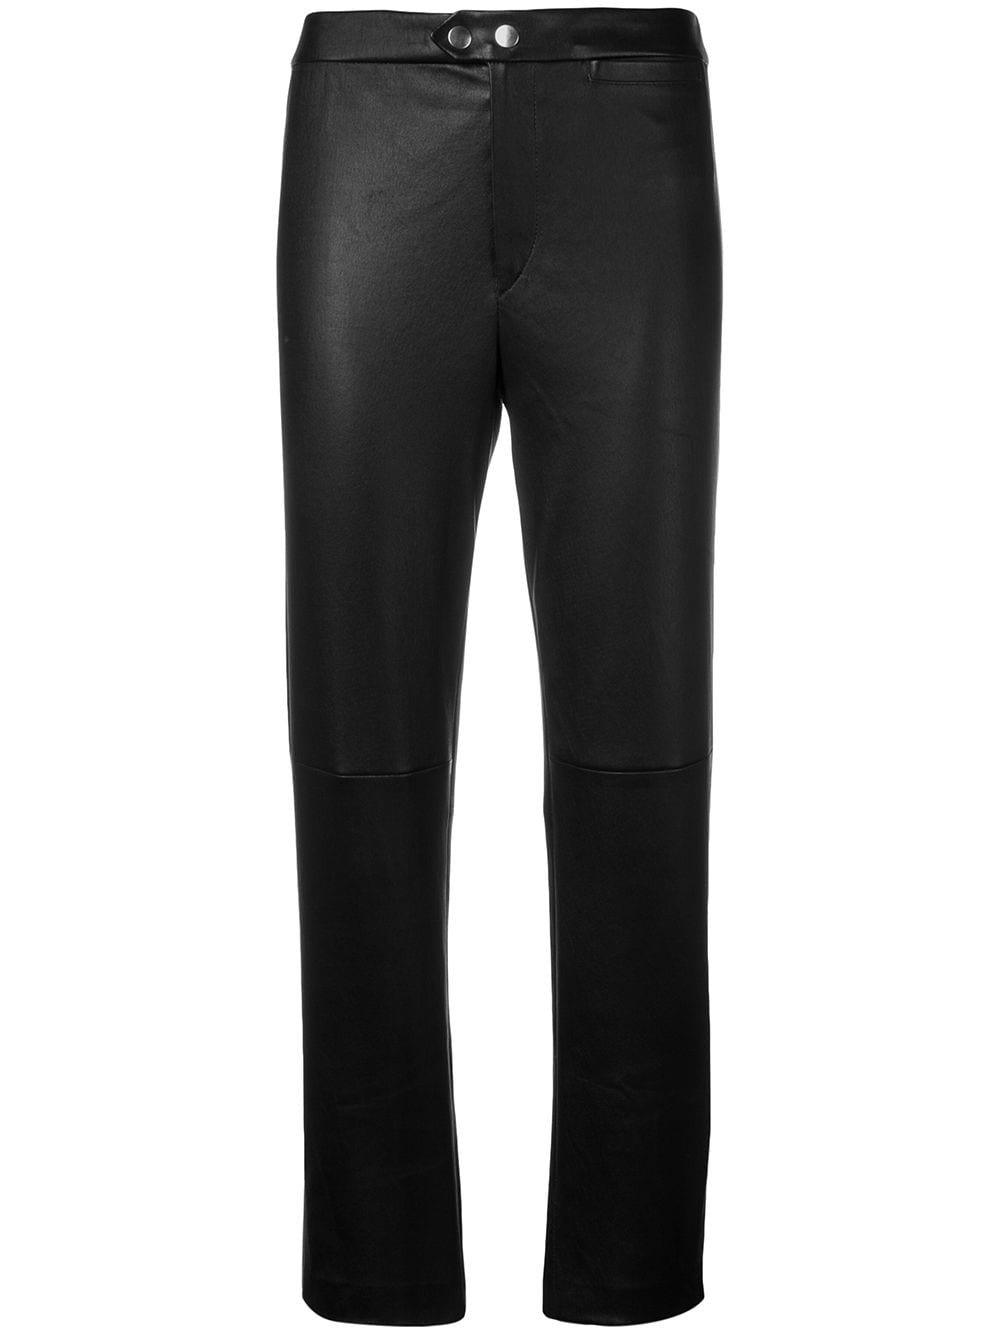 ISABEL MARANT Black Leather Pants for Women - SS19 Collection